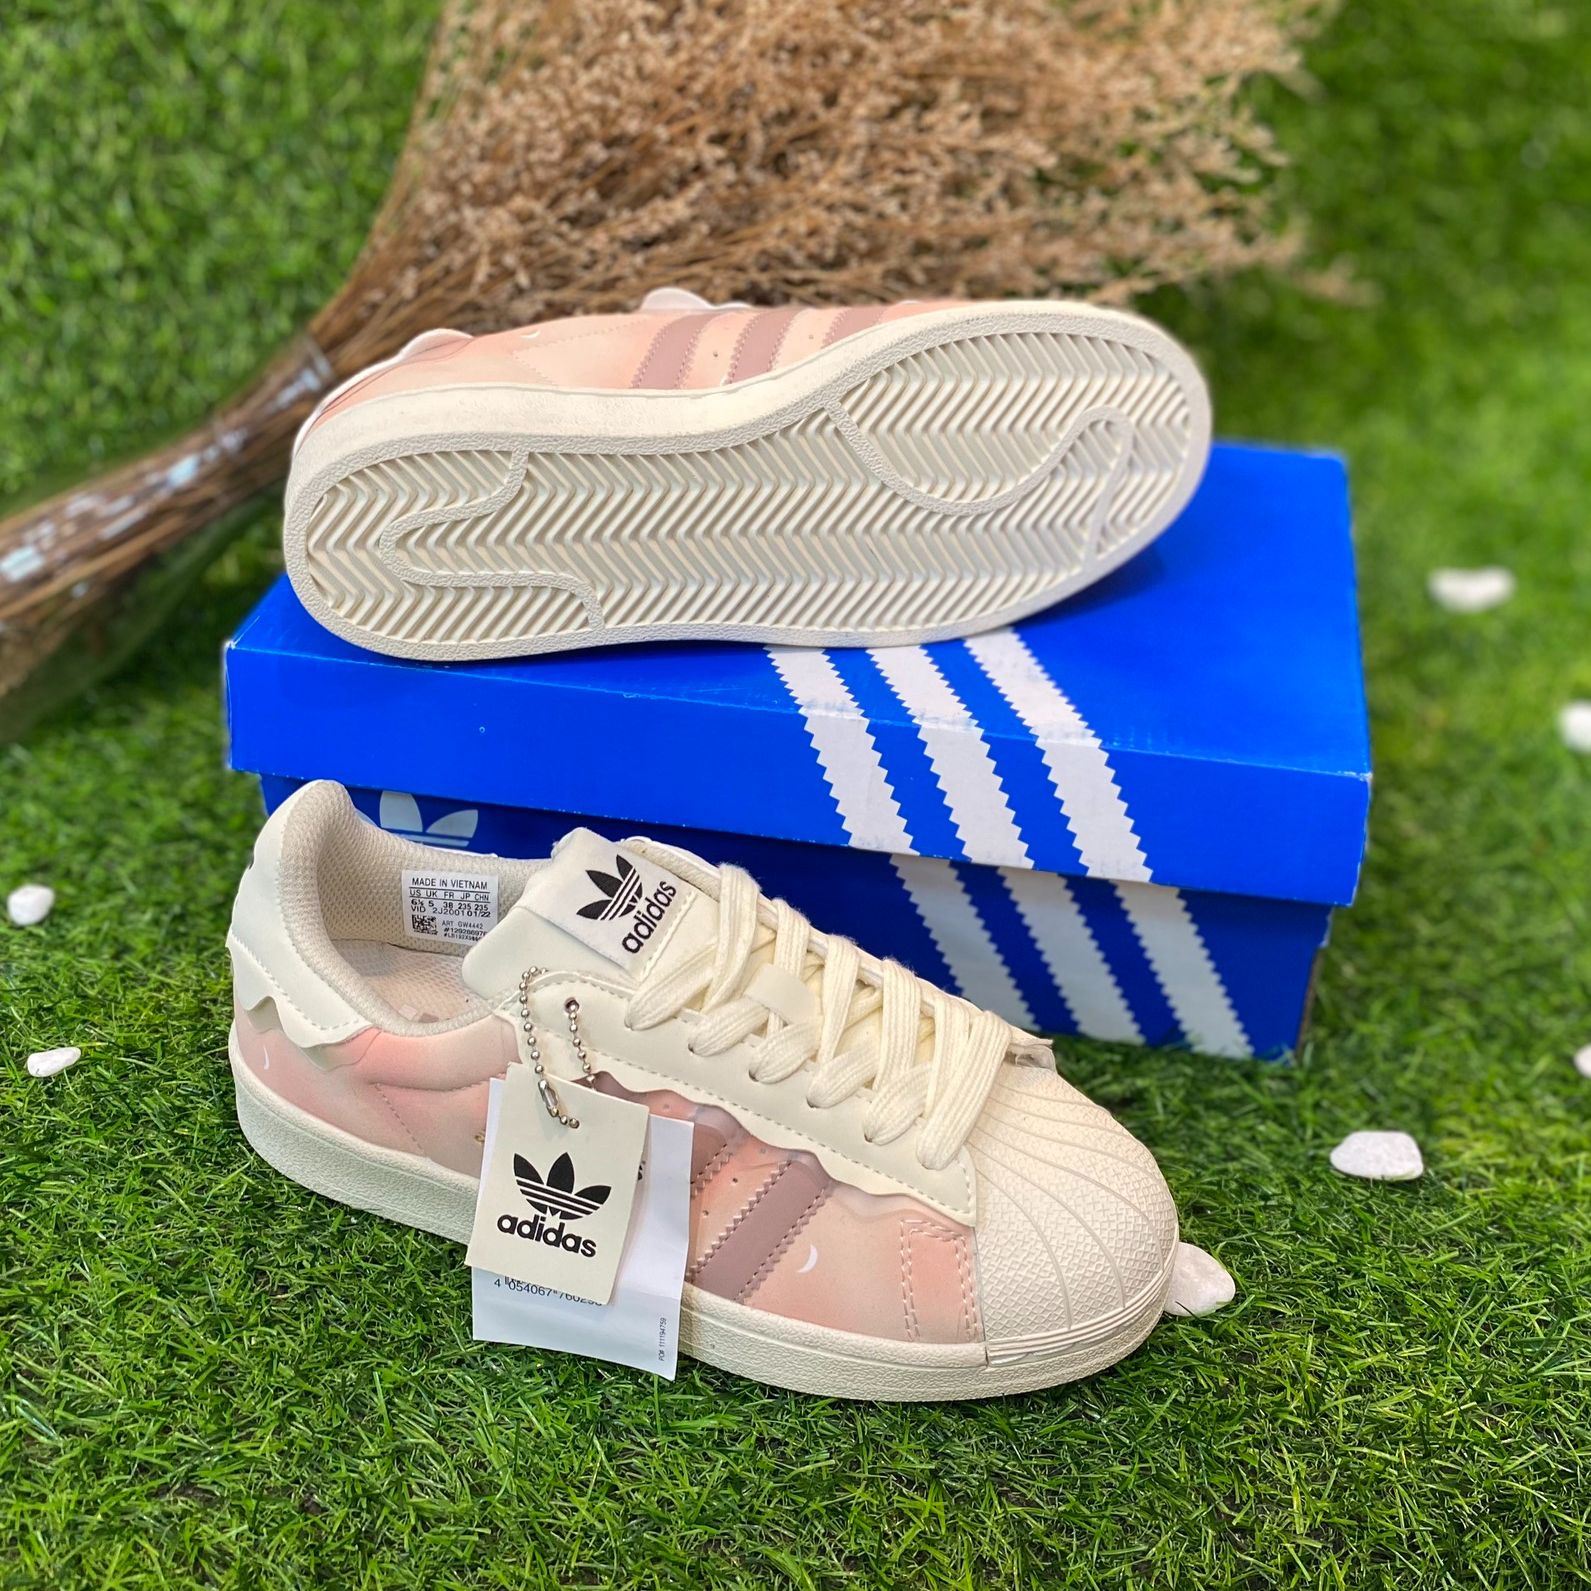 Adidas Superstar Pink washed-out color Sneakers - Women's Fashion Shoes. size 36-39